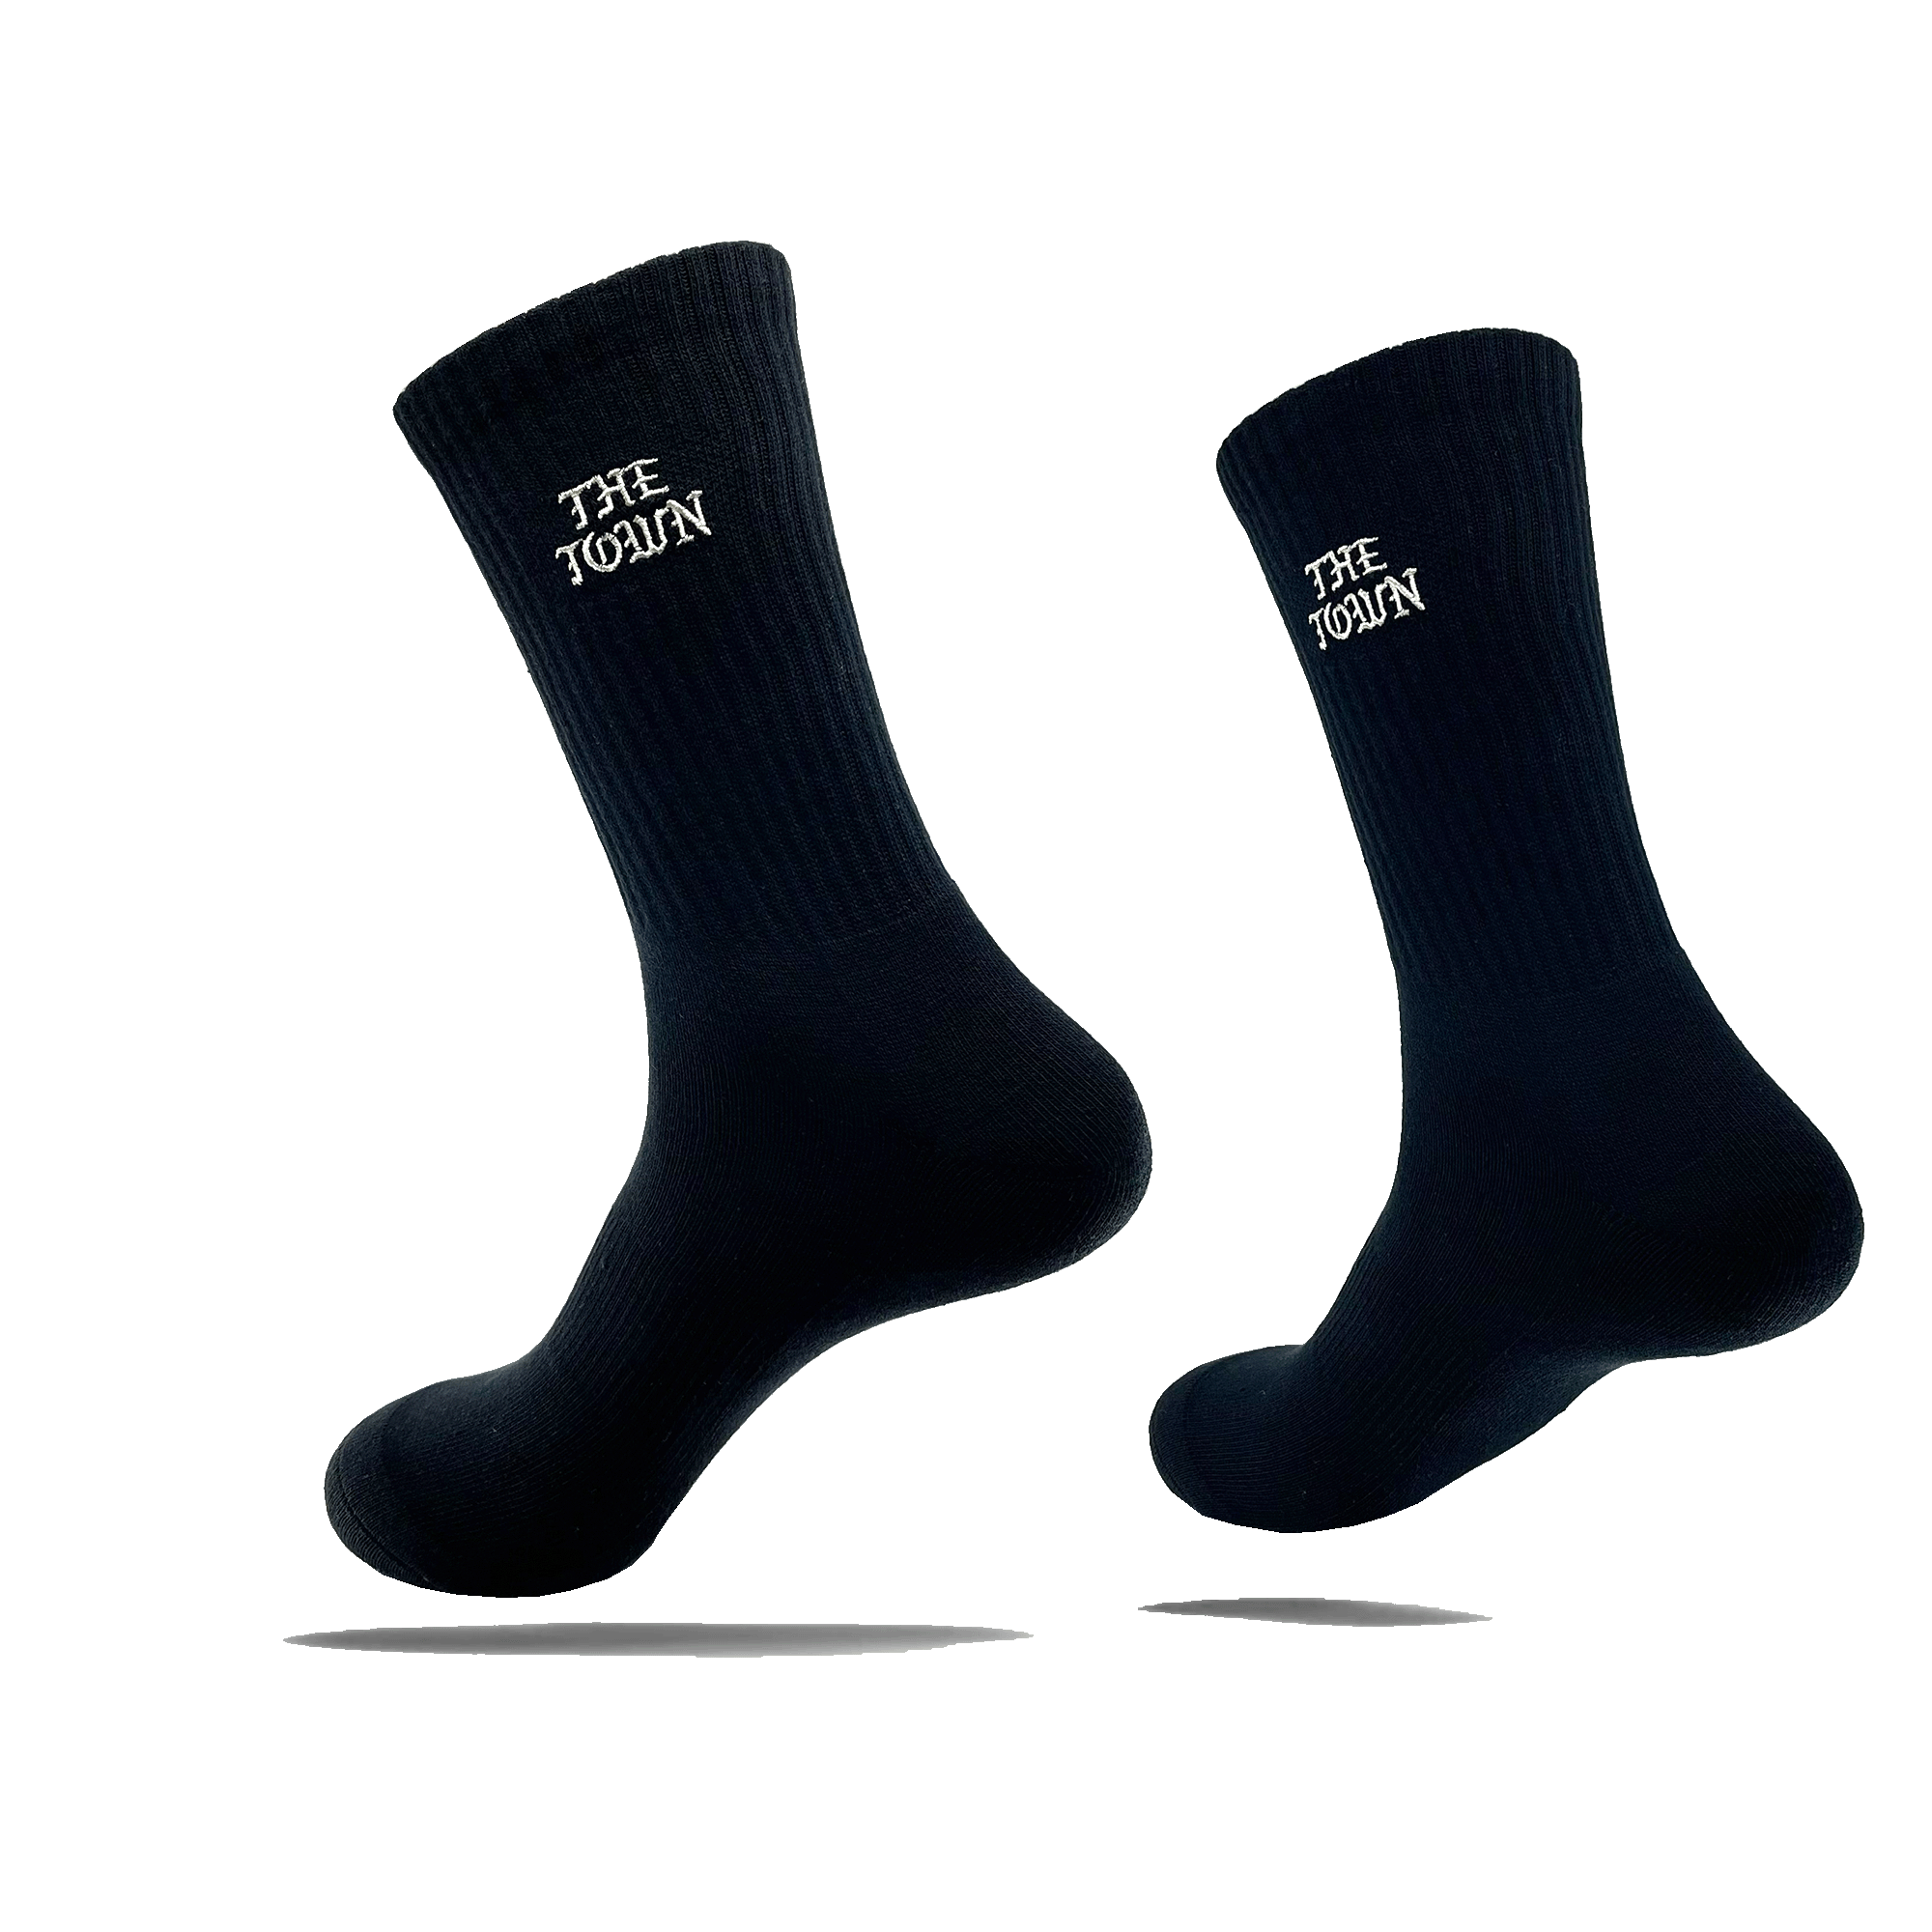 Side view of black crew socks with embroidered white THE TOWN wordmark in Old Town English on the calves.